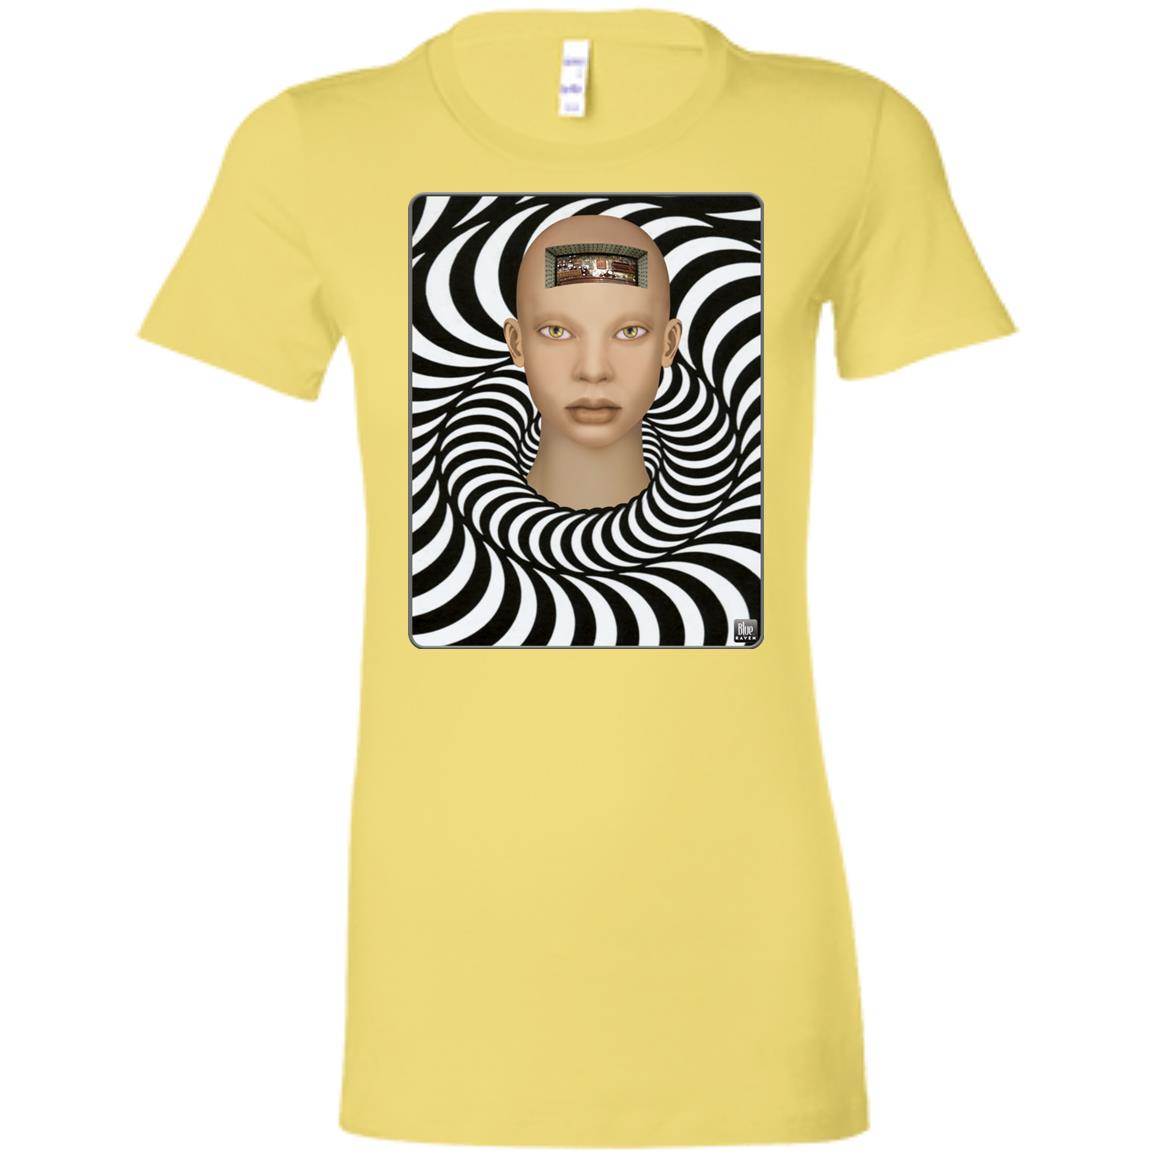 COMPUTERIZED - Women's Fitted T-Shirt